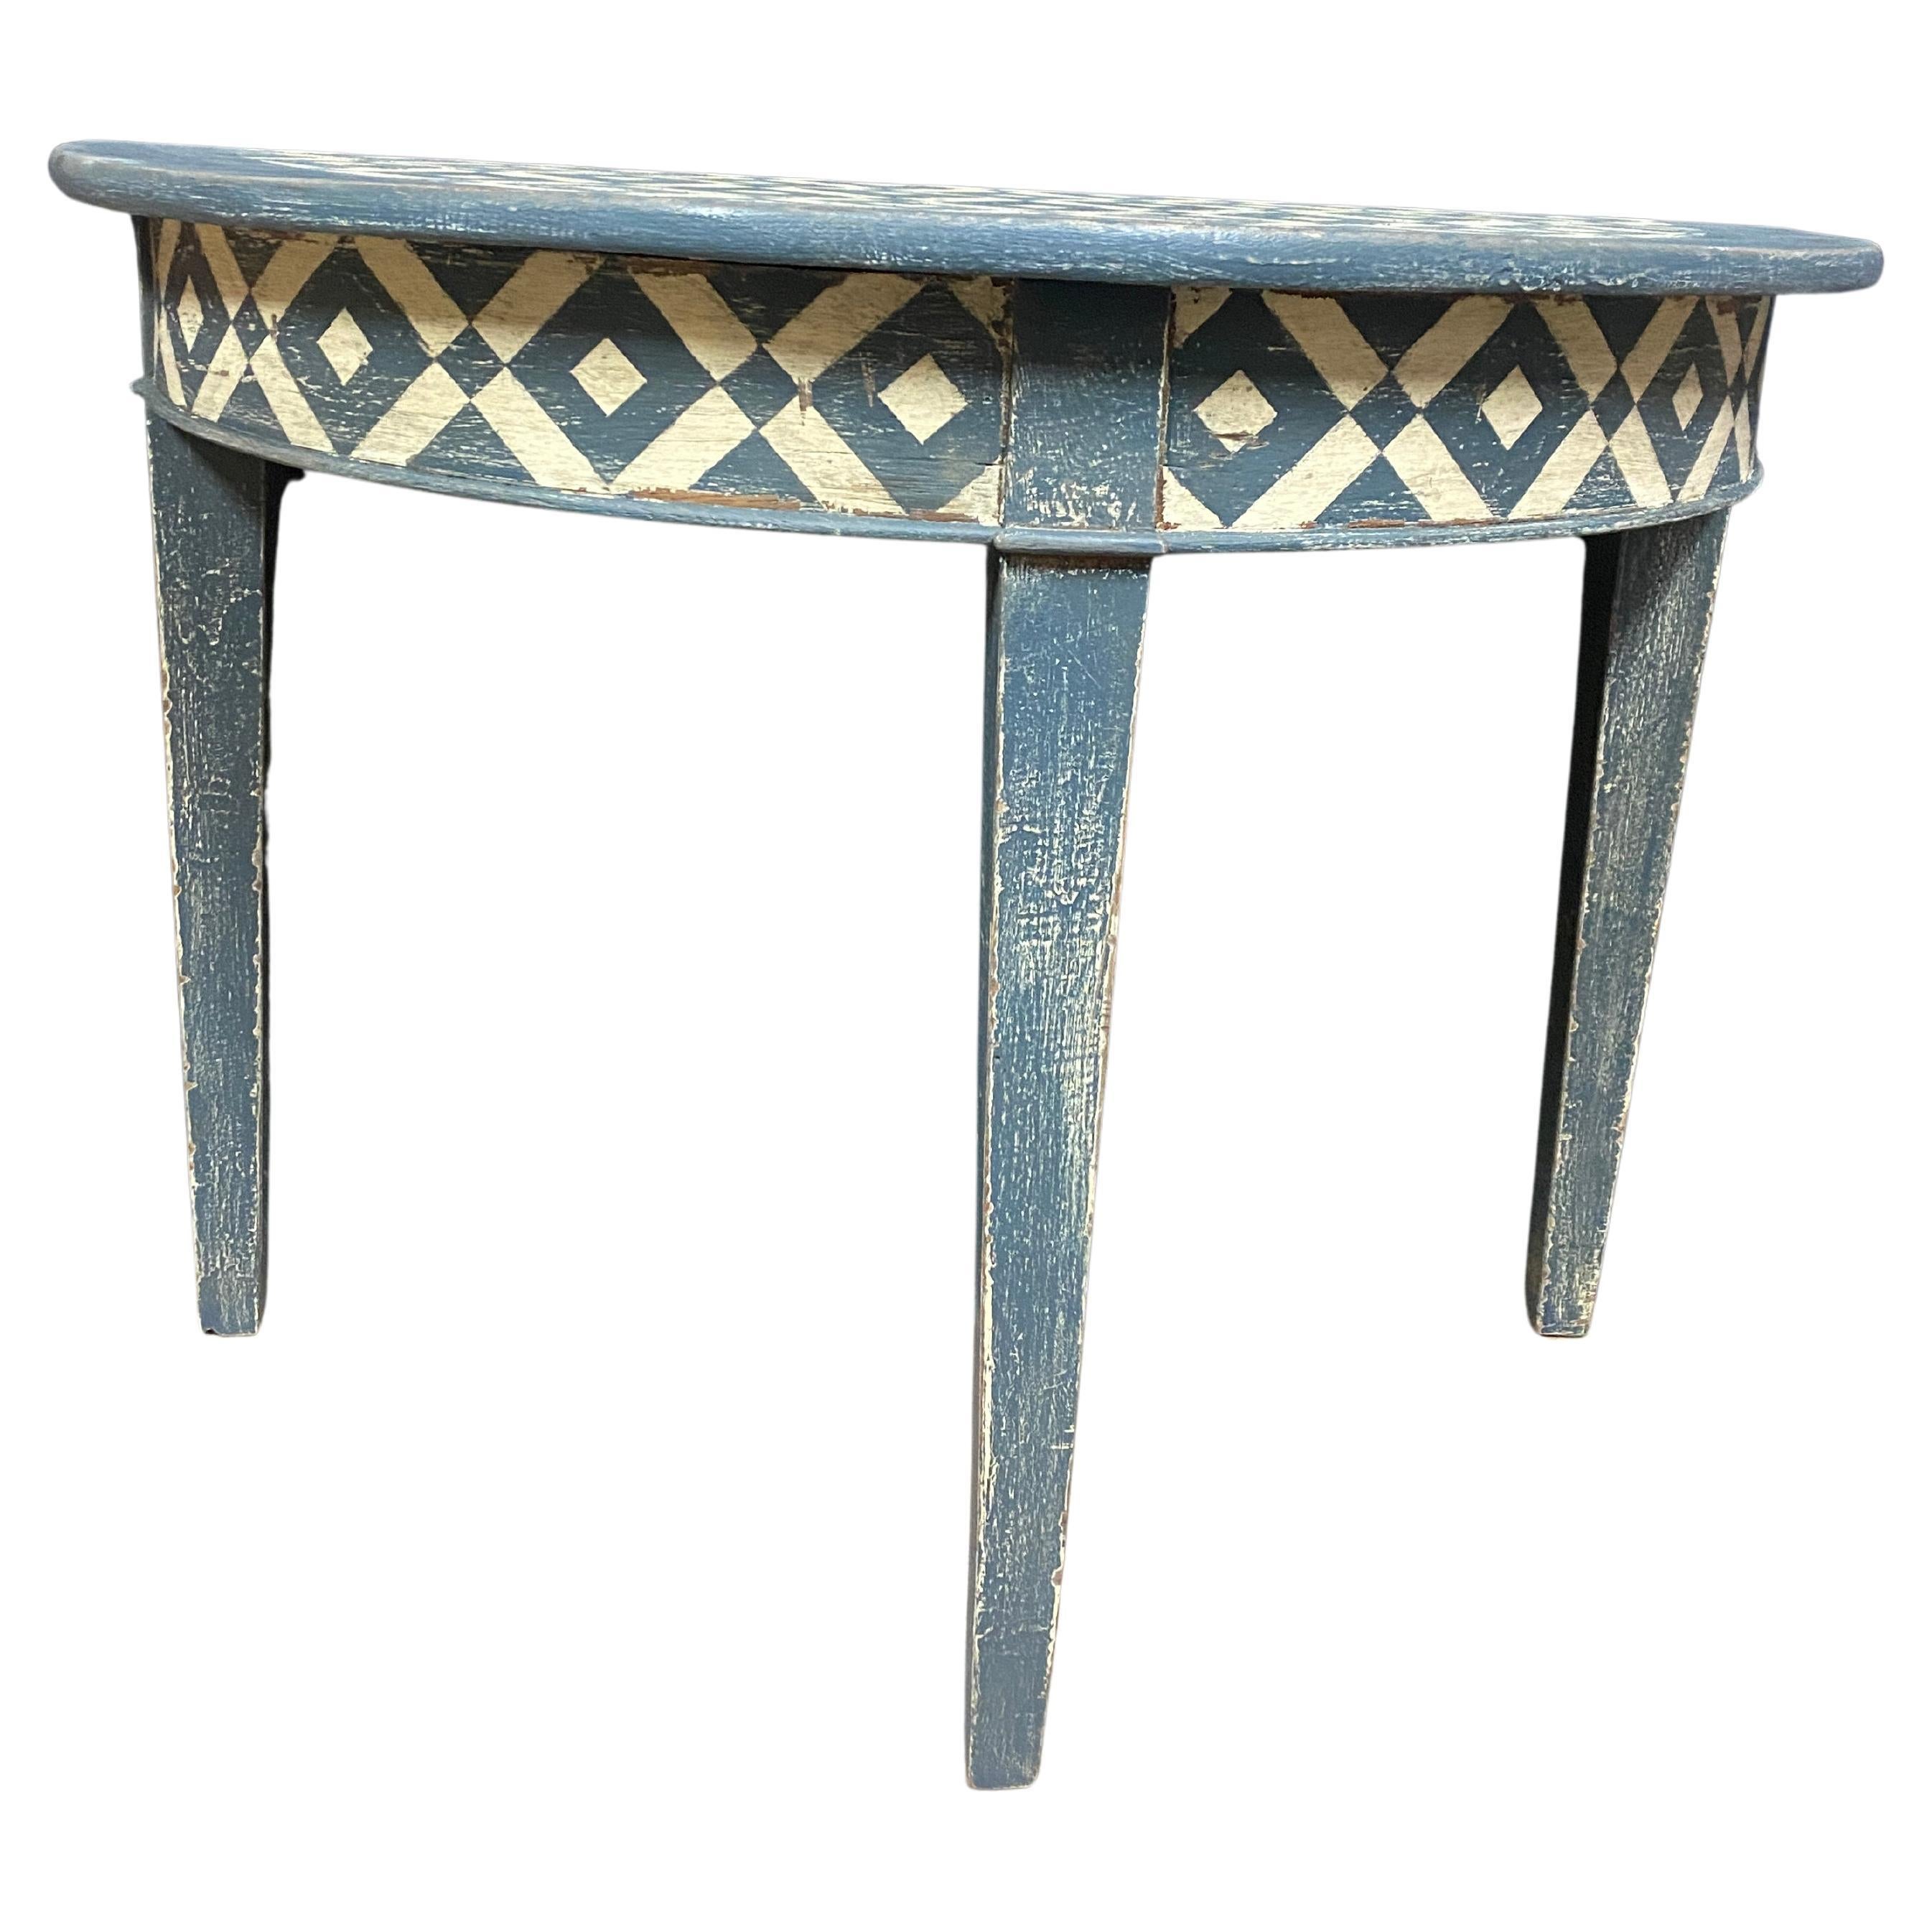 half-moon console table with saber legs dating from the 18th century, very beaut